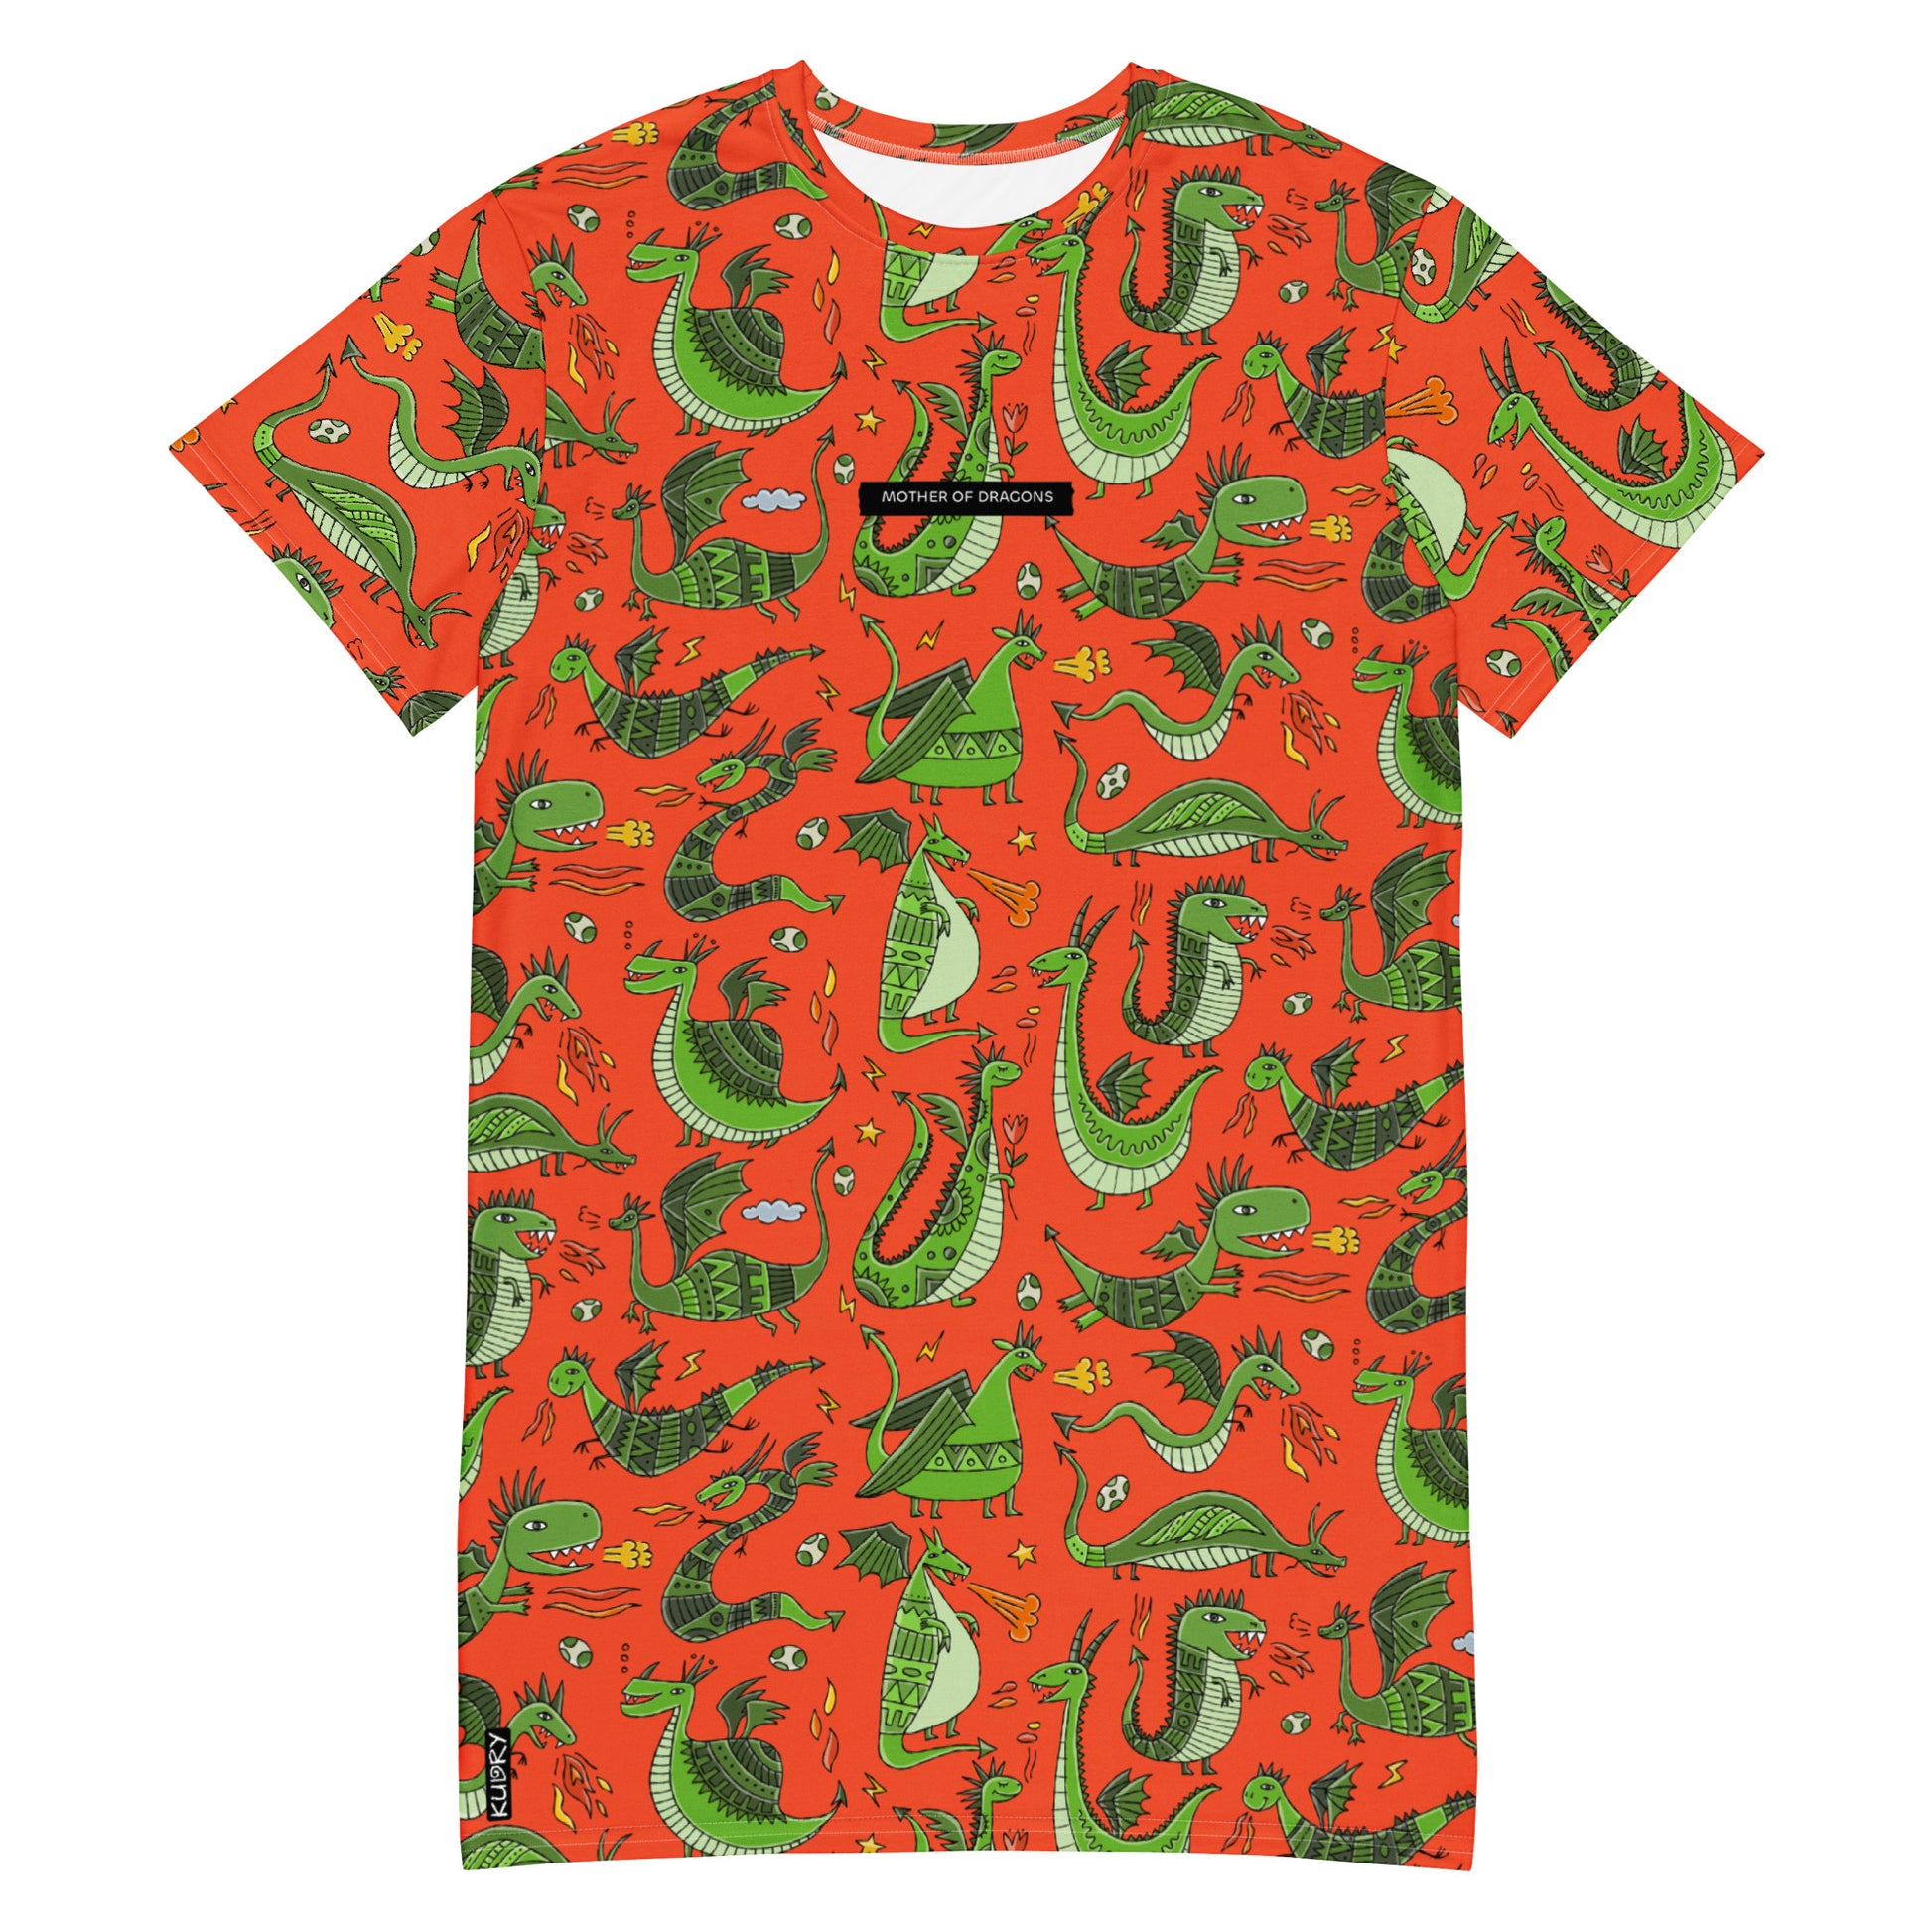 T-shirt dress personalised with funny green dragons on red. Basic text - Mother of Dragons